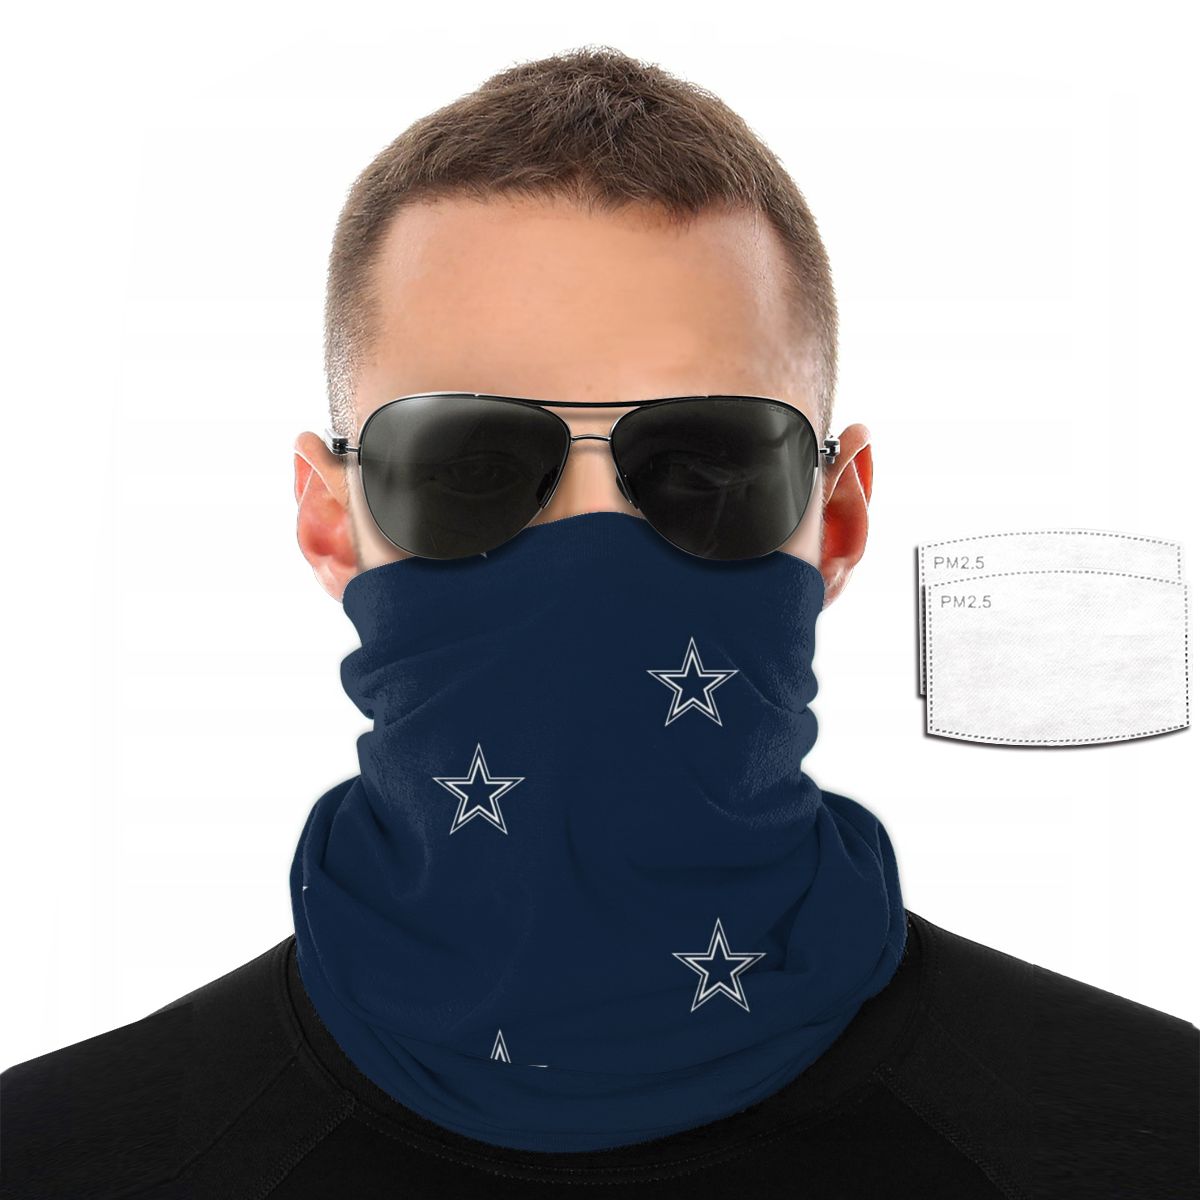 Reusble Mouth Cover Bandanas Dallas Cowboys Variety Head Scarf Face Mask With PM 2.5 Filter